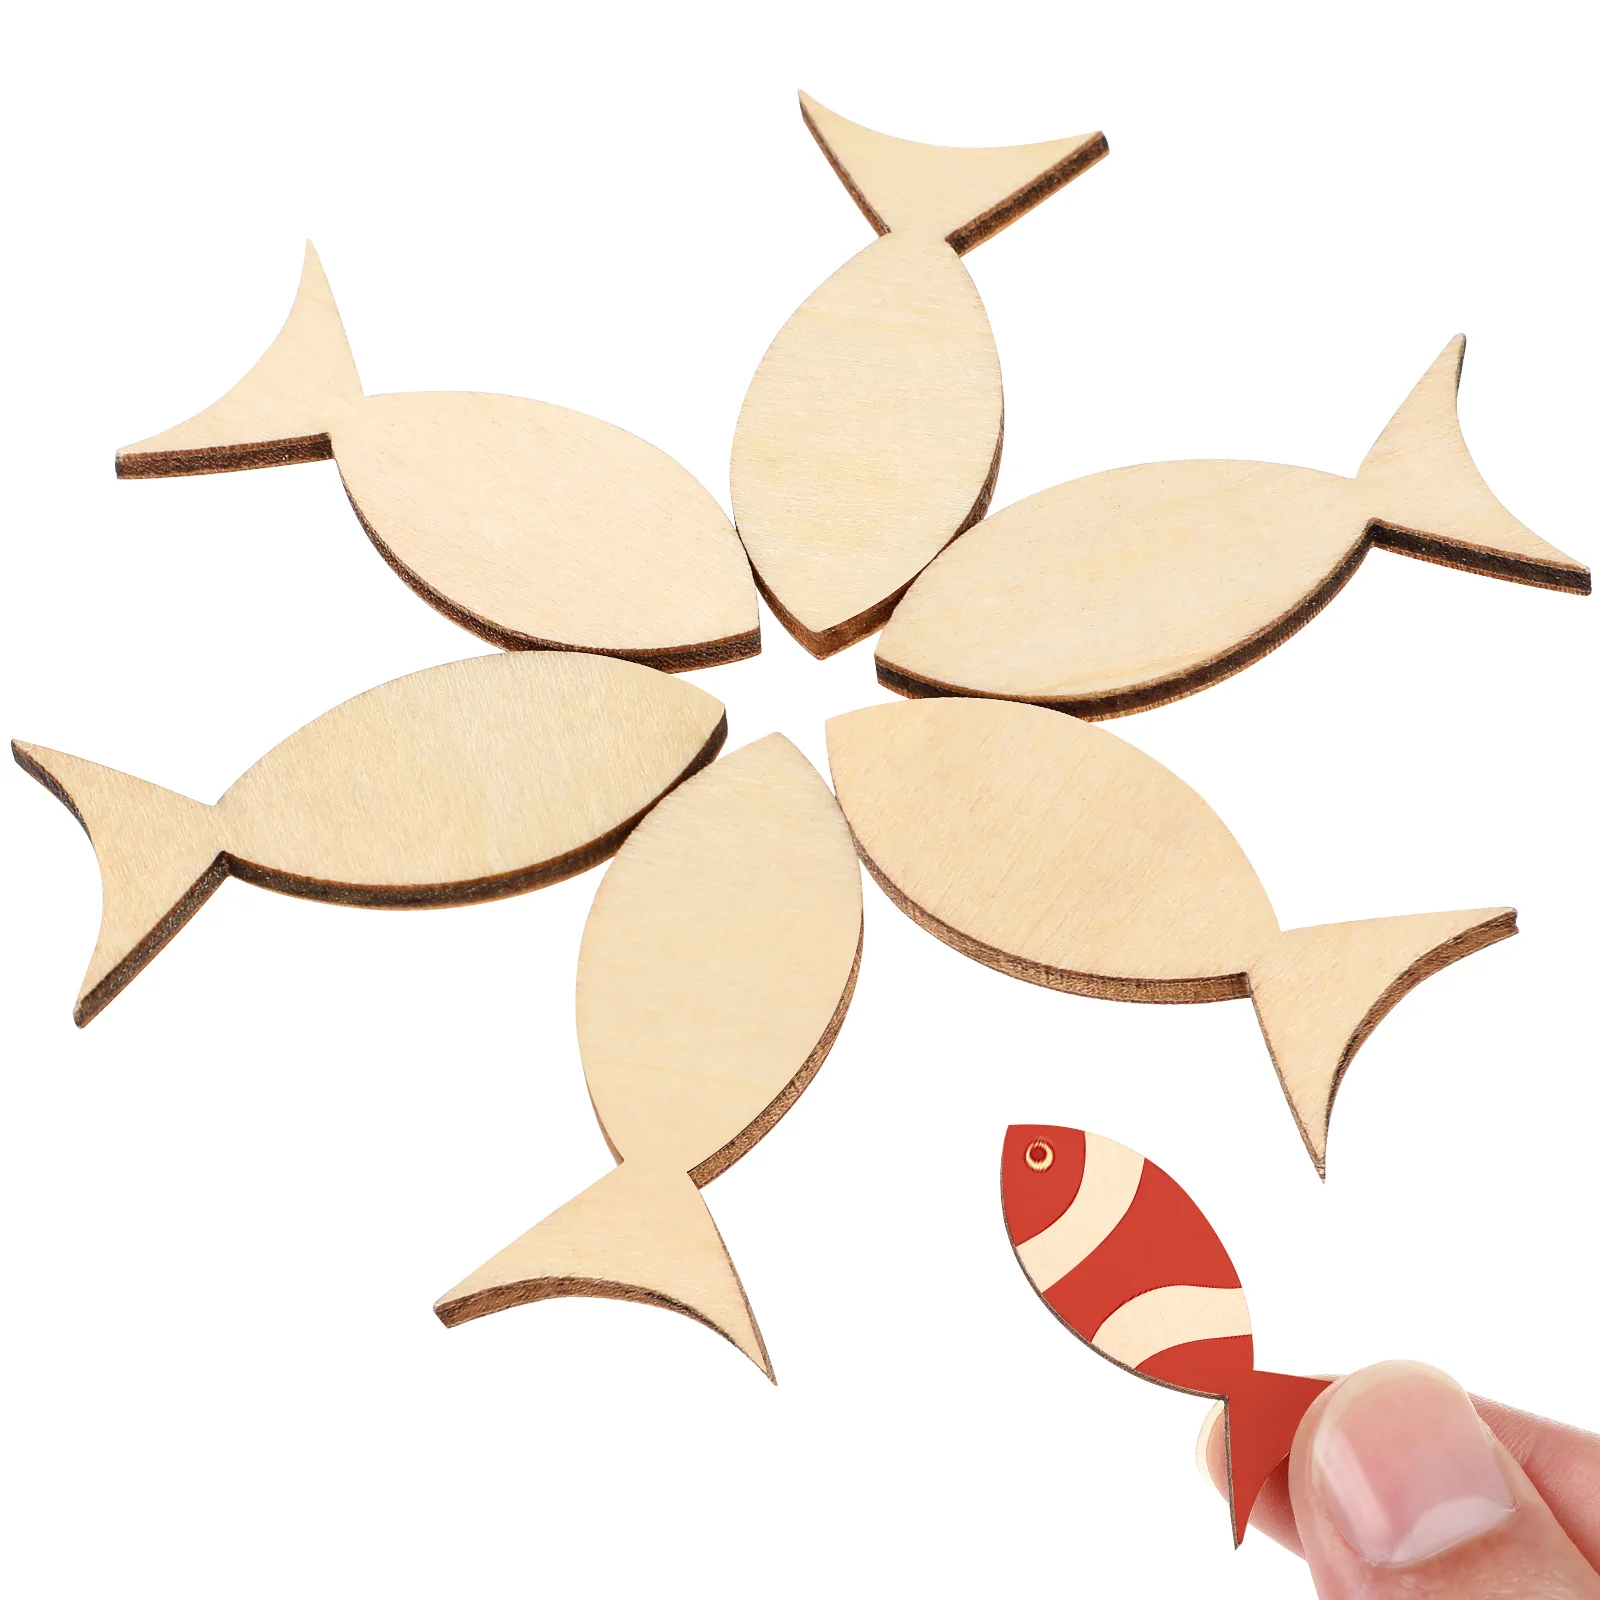 

100 Pcs Wooden Solid Fish Gift Tags Ship Ornaments Craft Embellishments Crafts Unfinished Slices Decorations